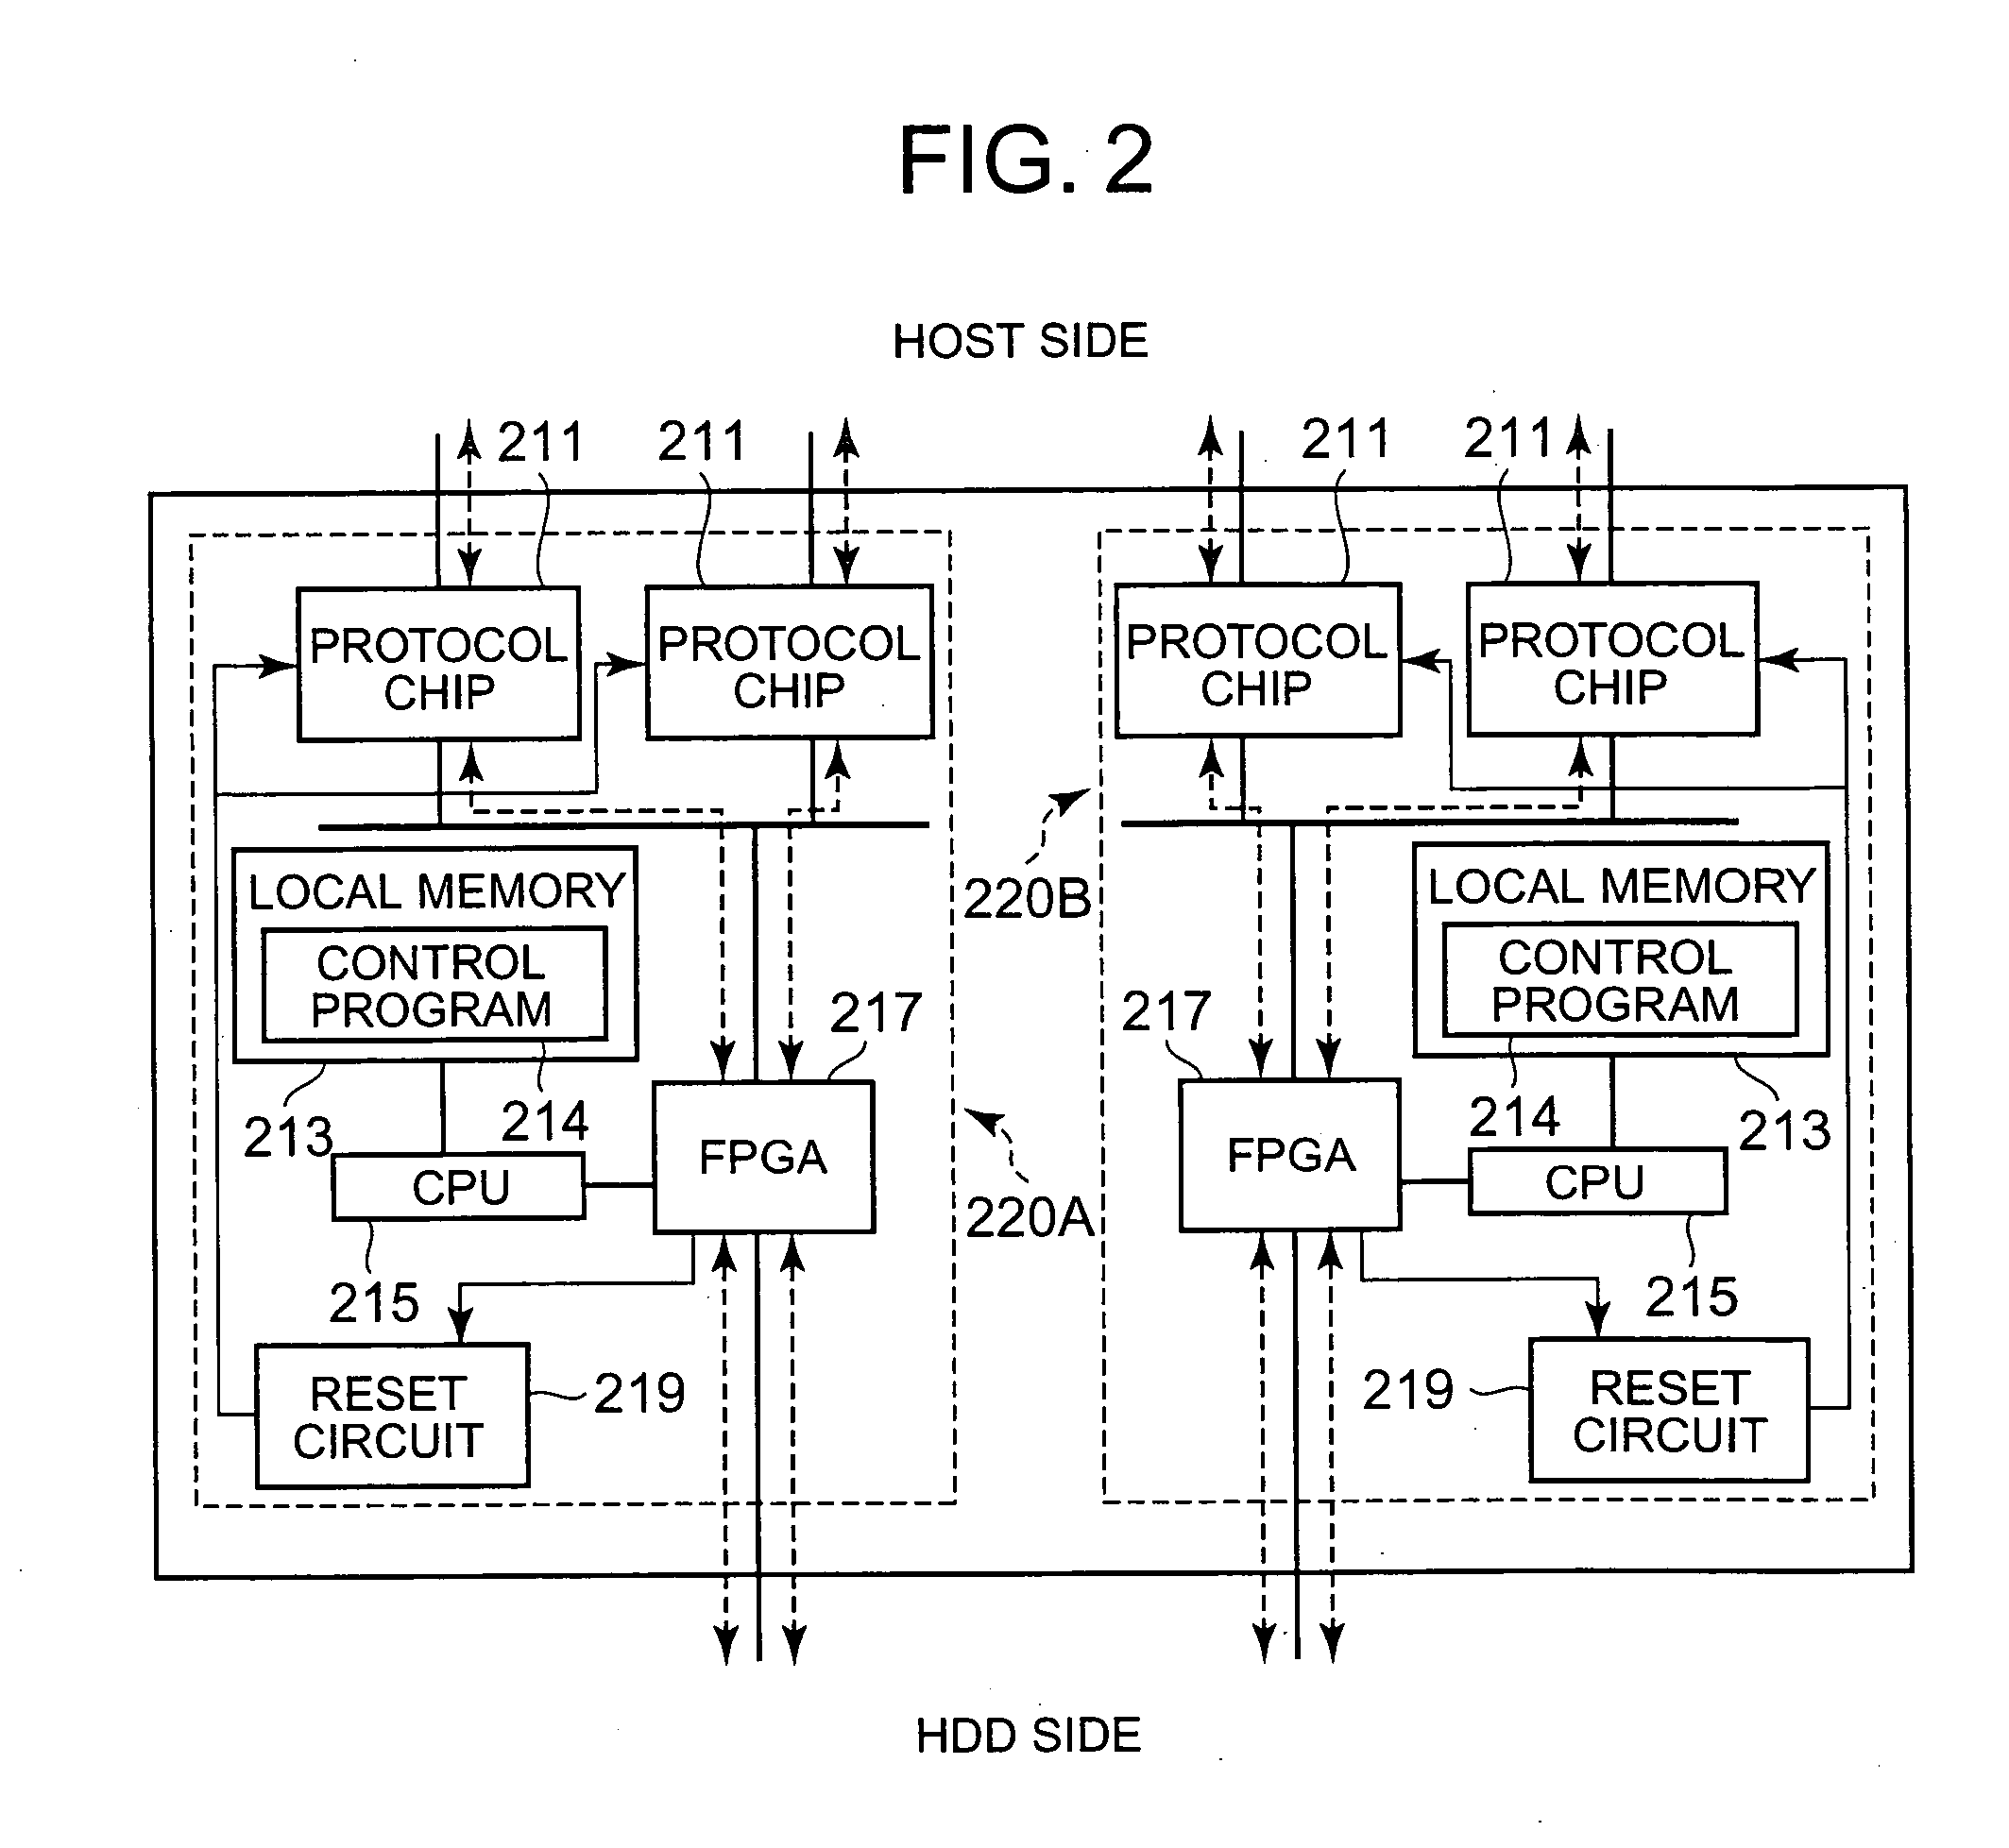 Storage system comprising logical circuit configured in accordance with information in memory on PLD